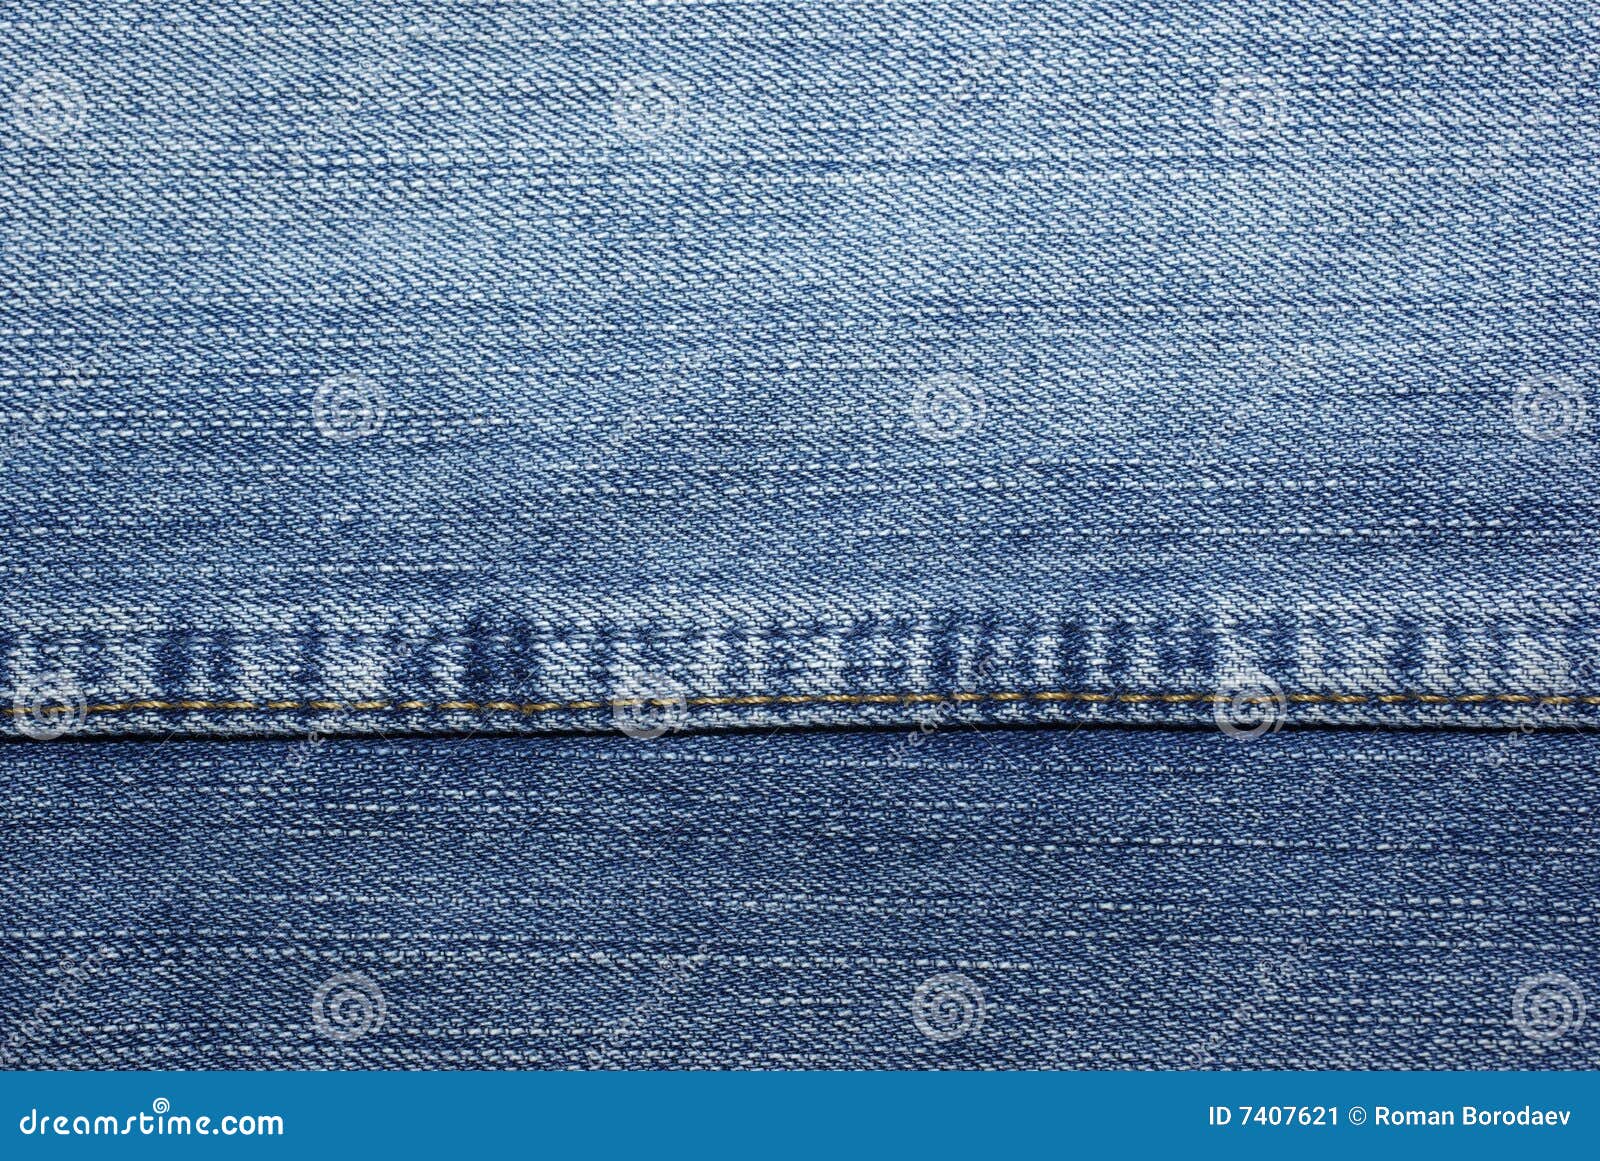 Blue jeans with stitches stock image. Image of industry - 7407621